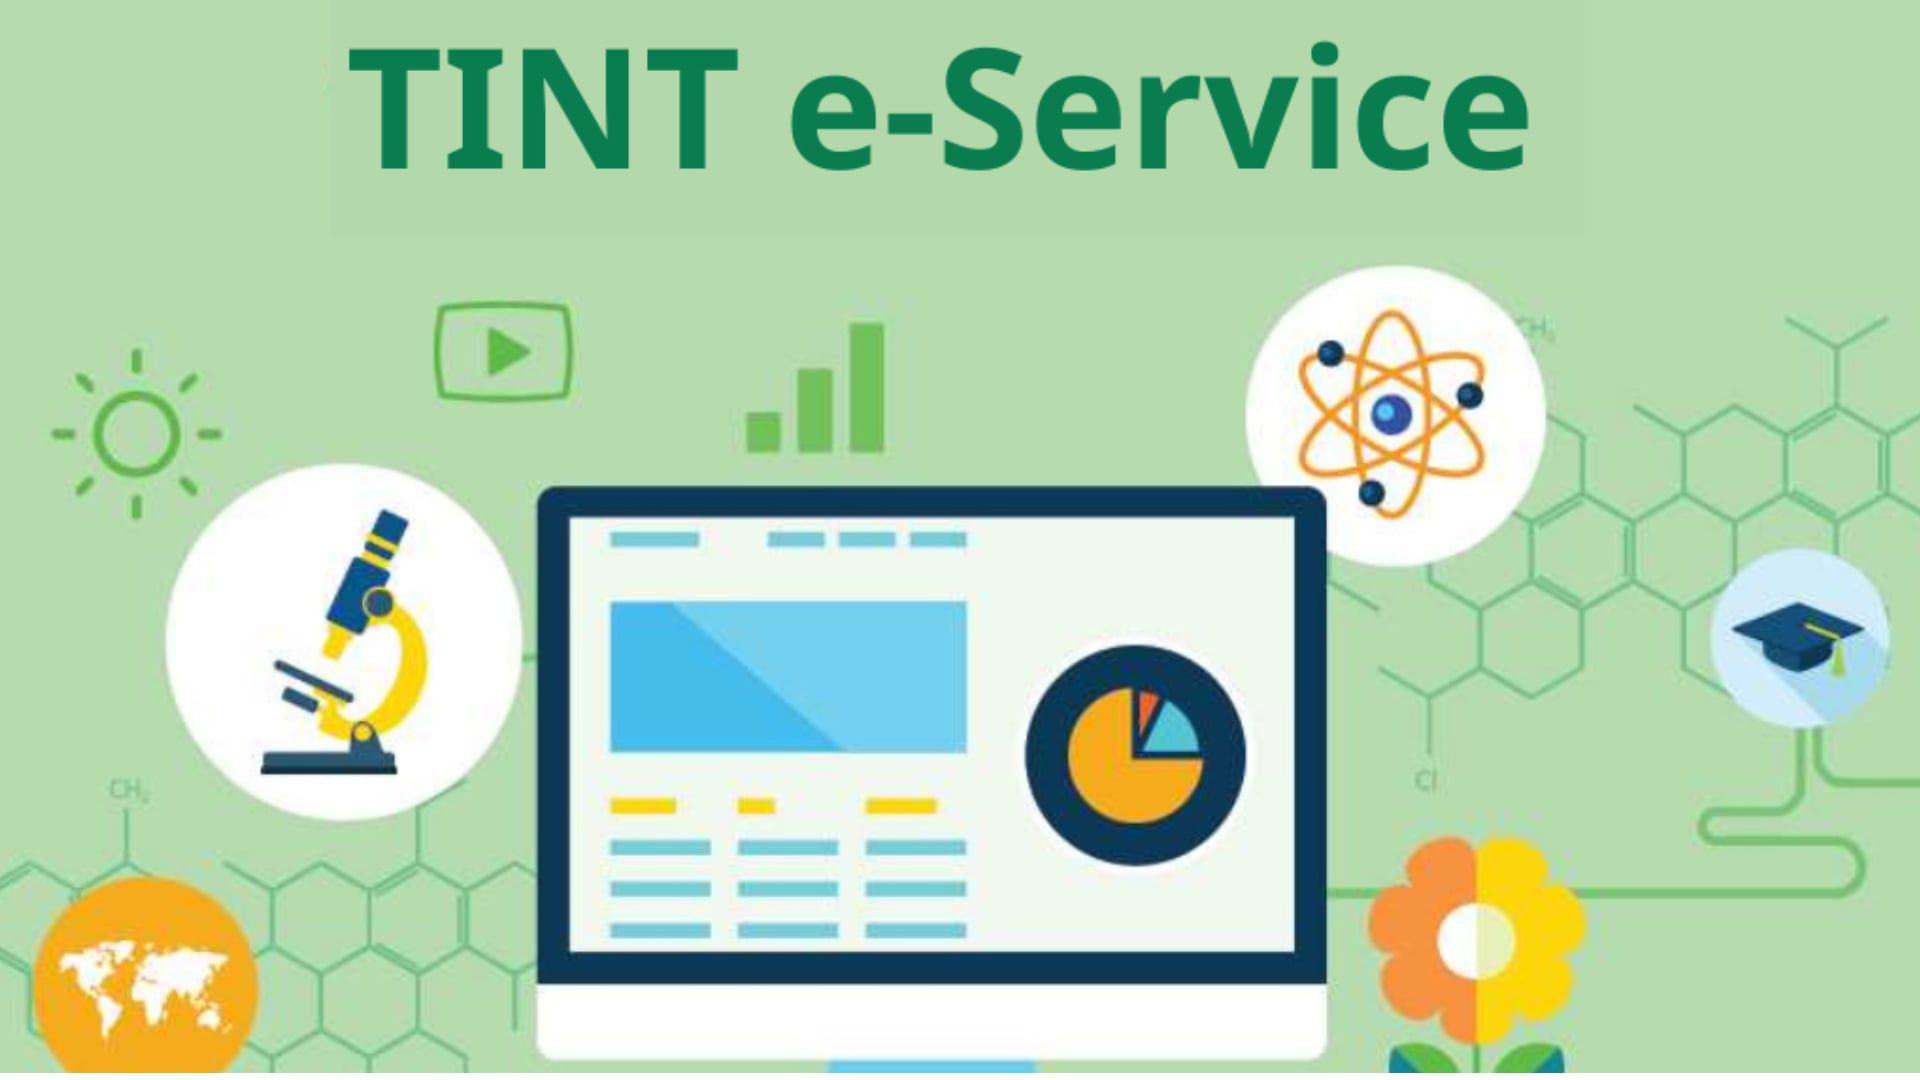 https://eservice.tint.or.th/site/login